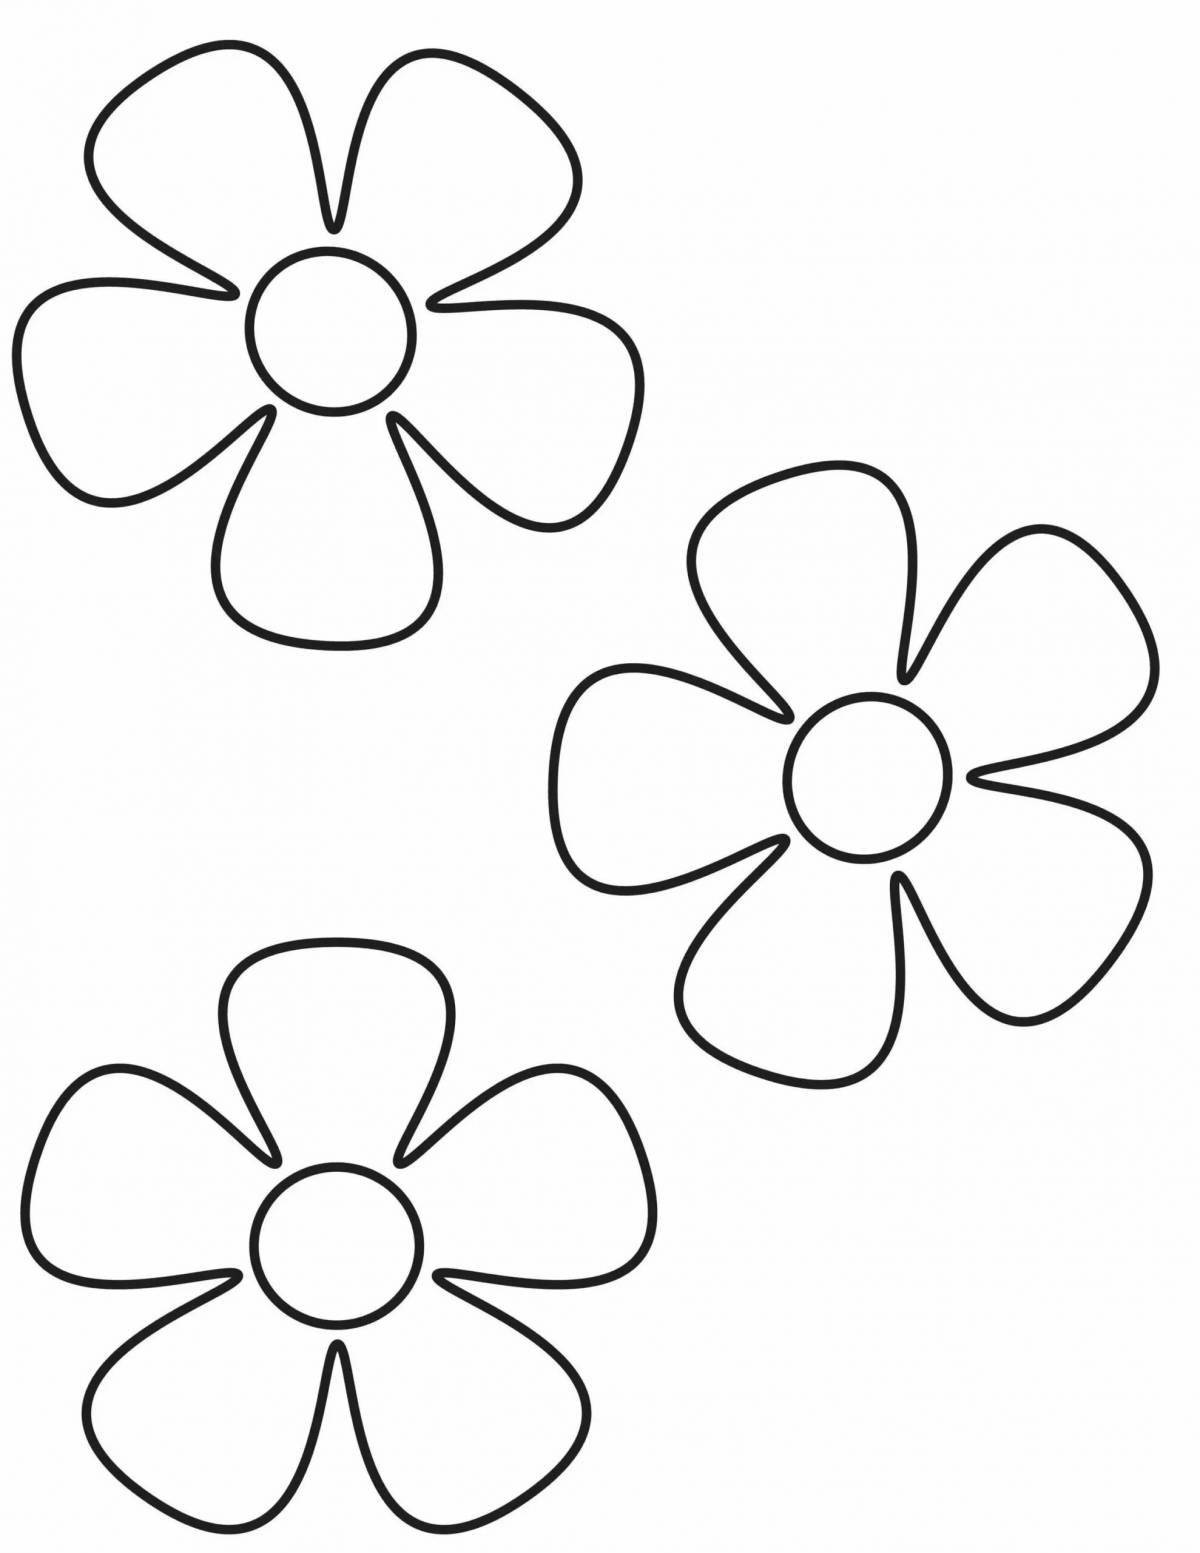 Great flowers coloring book for 2-3 year olds